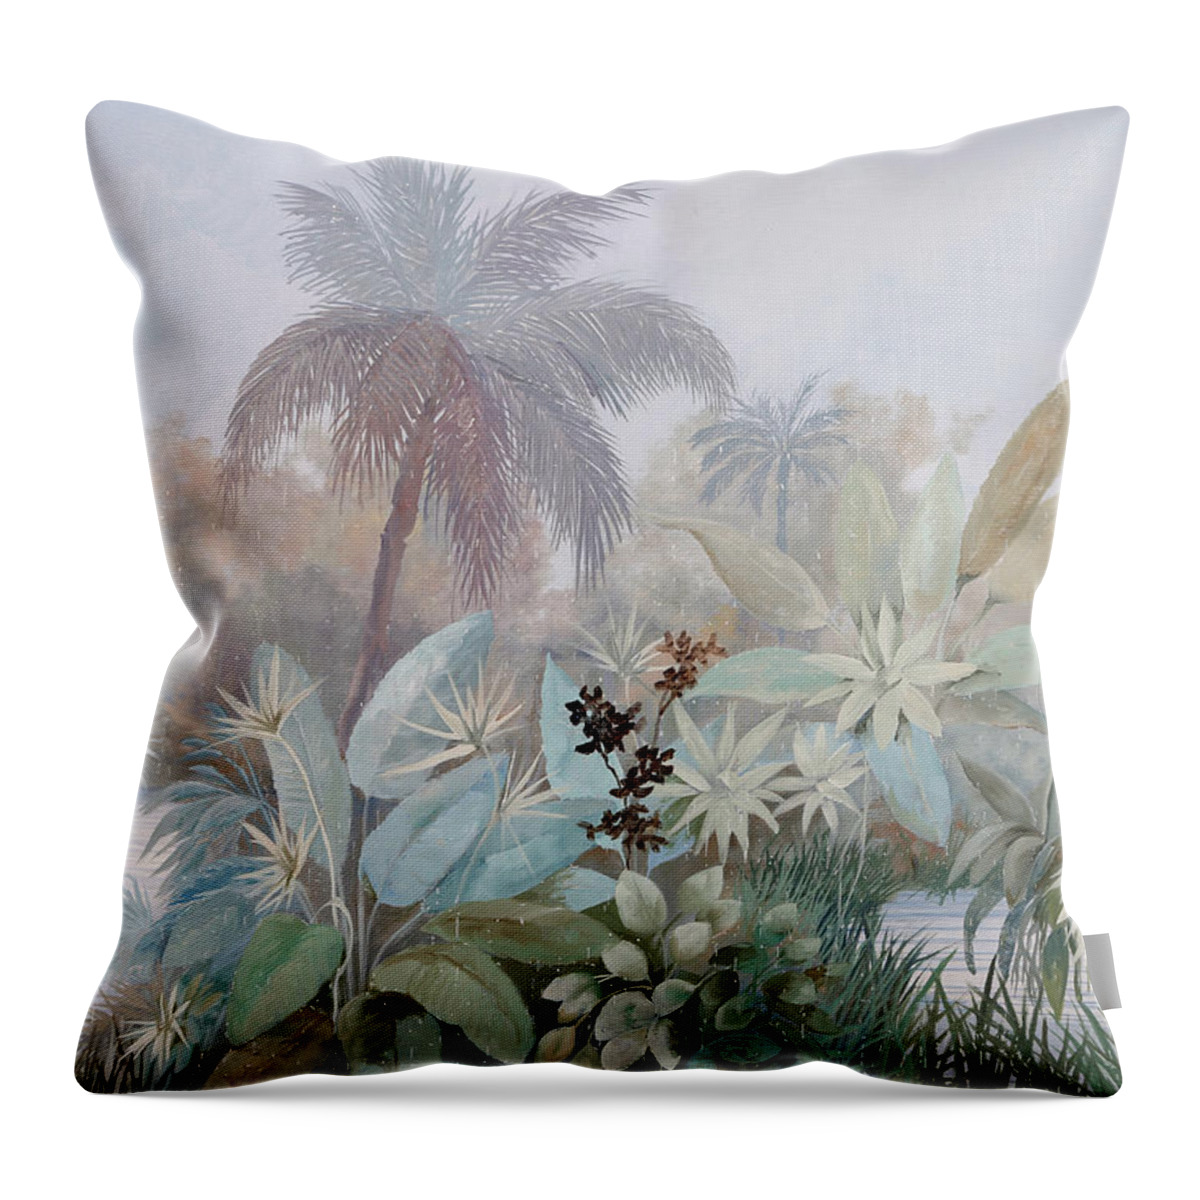 Fog Throw Pillow featuring the painting Nebbia Luminosa by Guido Borelli